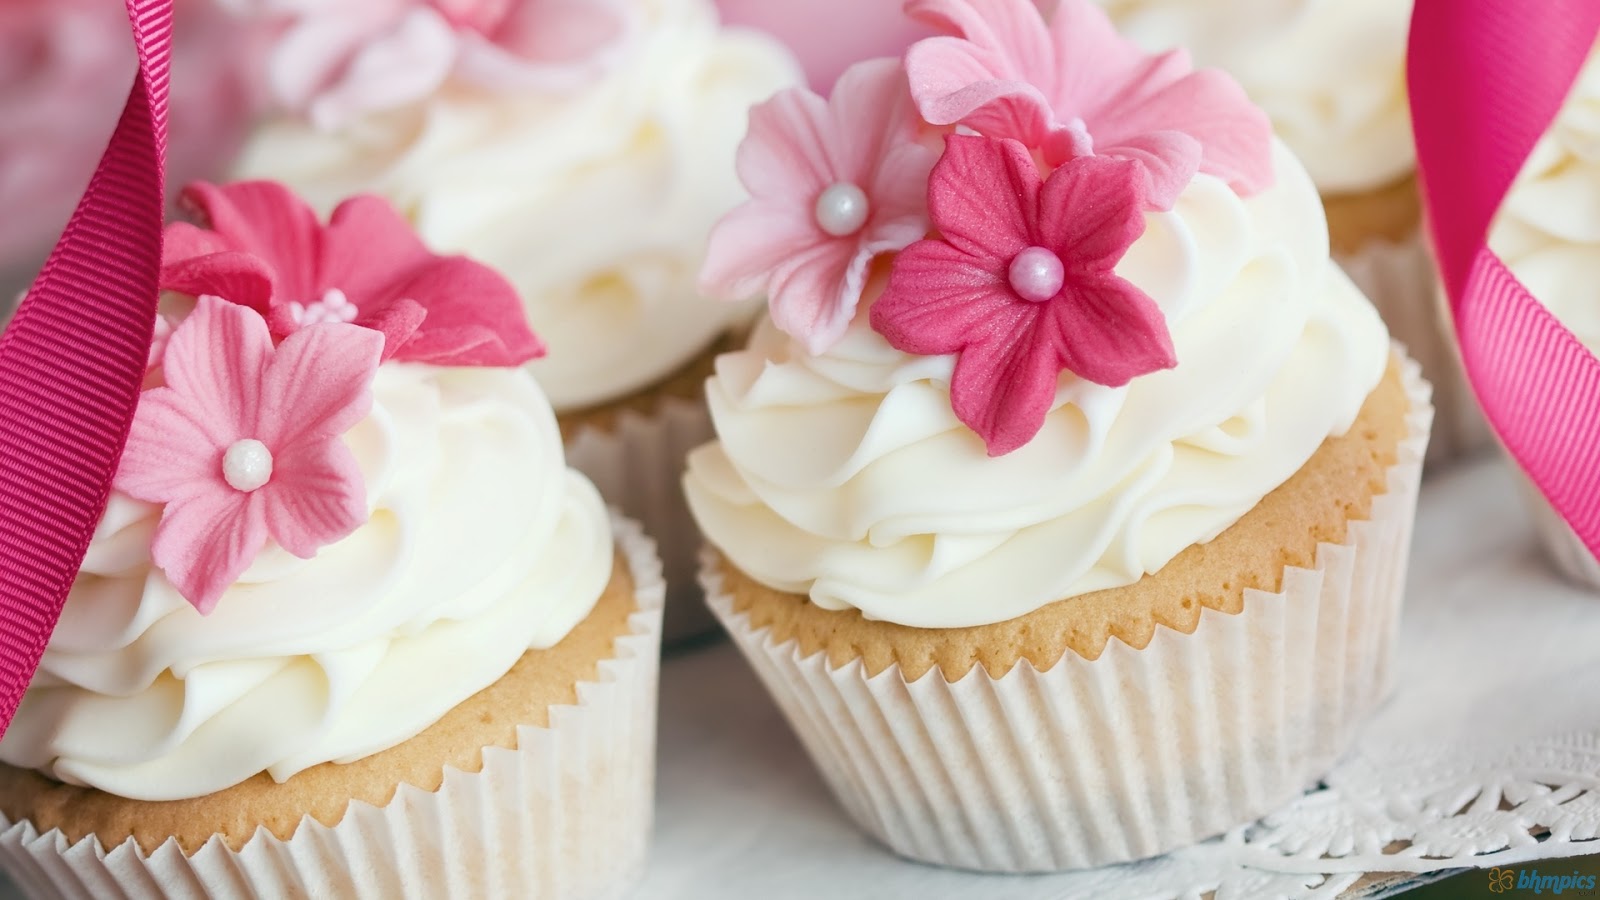 Cupcakes HD Wallpaper High Definition Quality Of Wedding